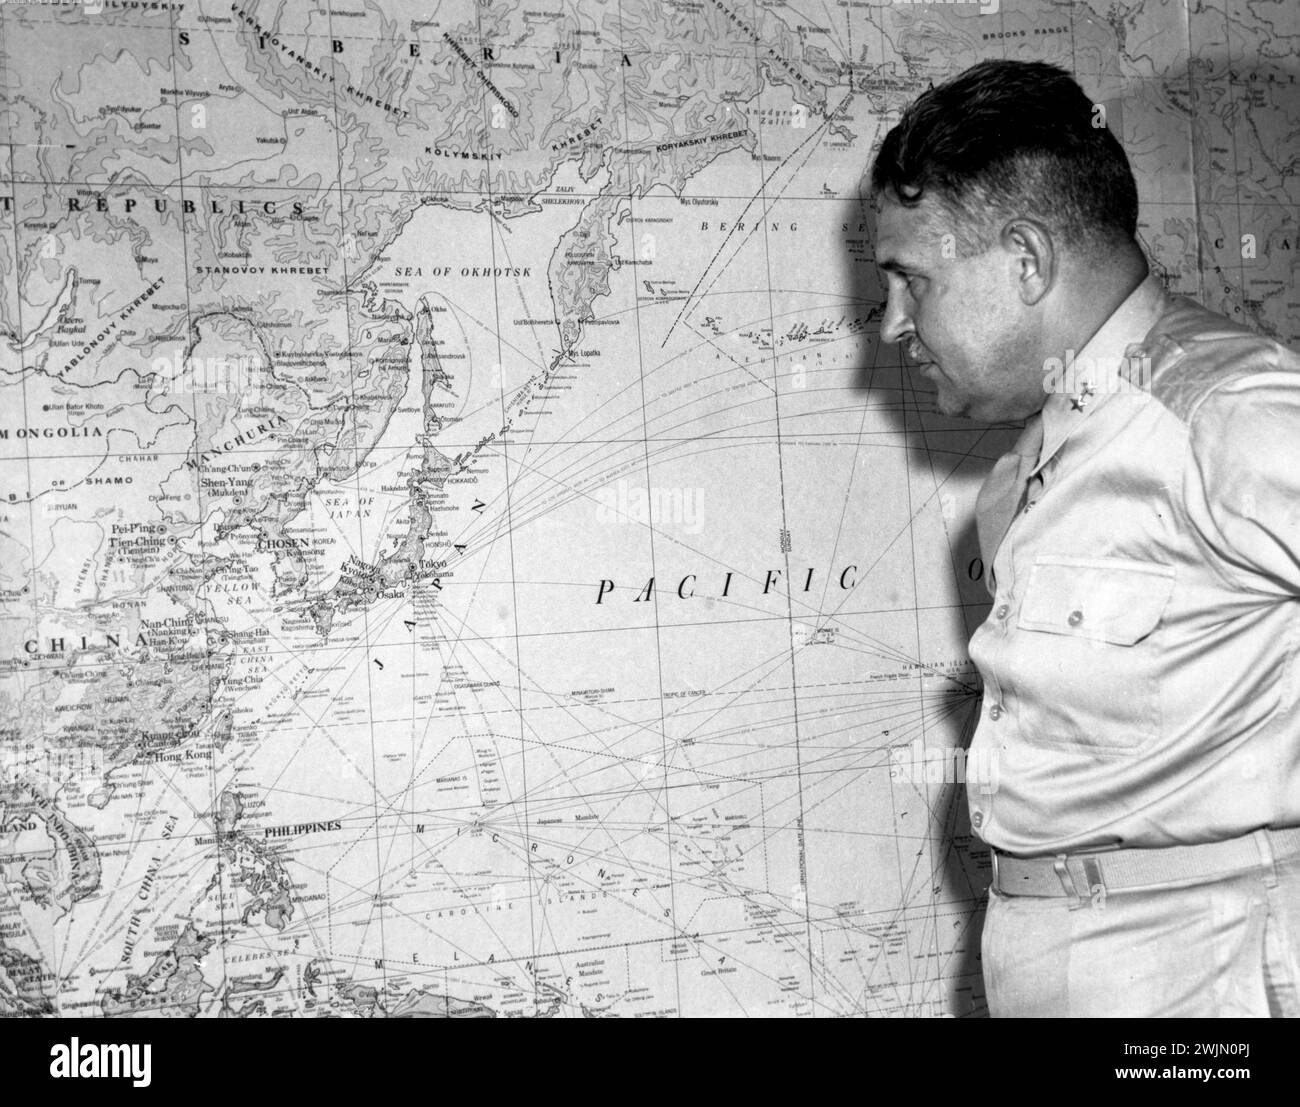 General Groves looking at a Pacific Ocean map at Oak Ridge. Groves was involved in the Atomic bombs that ended World War II. Stock Photo